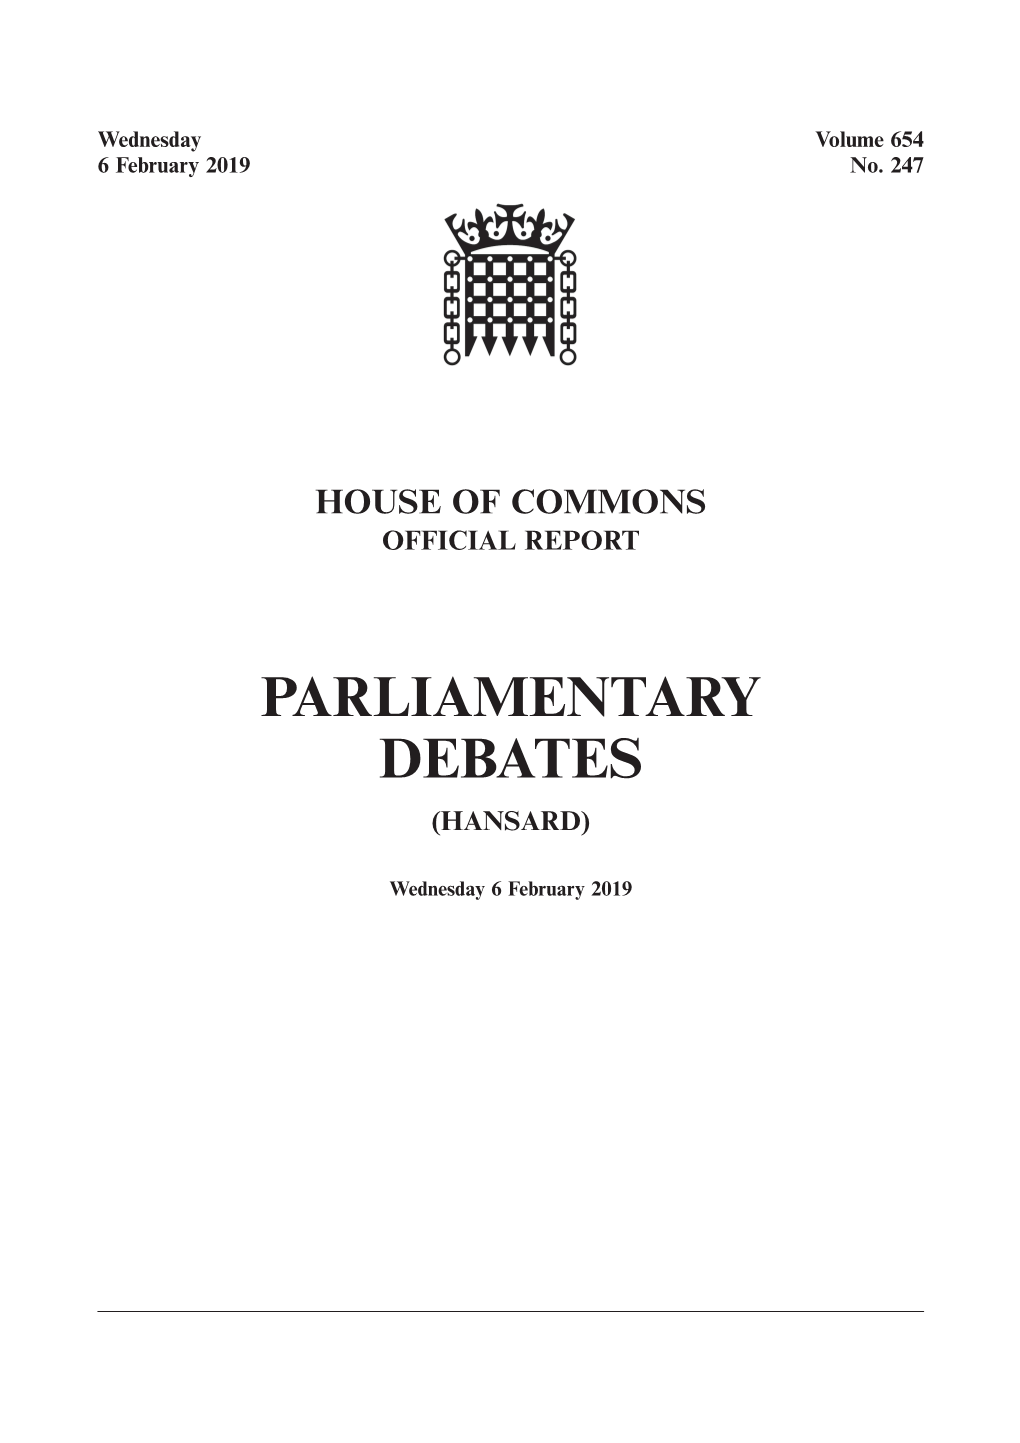 Whole Day Download the Hansard Record of the Entire Day in PDF Format. PDF File, 0.87